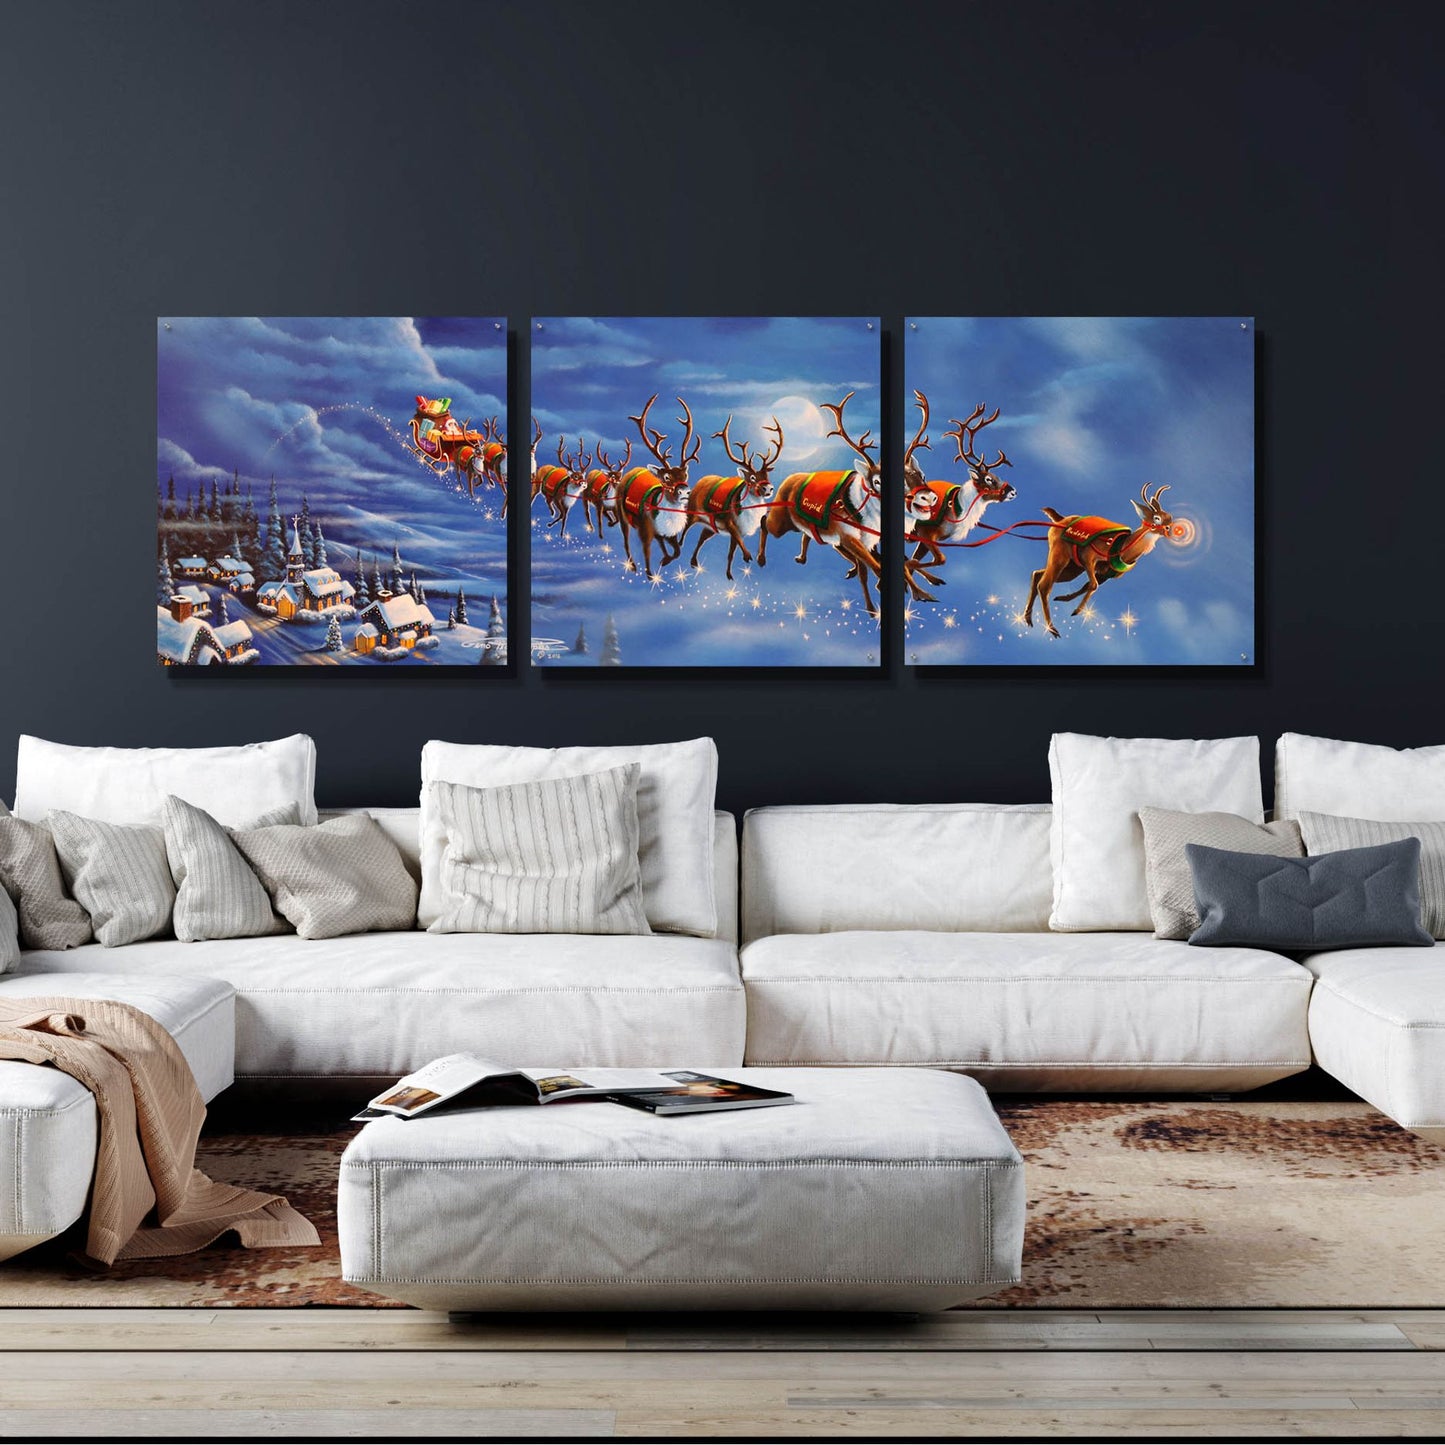 Epic Art 'Twas The Night Before Christmas' by Geno Peoples, Acrylic Glass Wall Art, 3 Piece Set,108x36